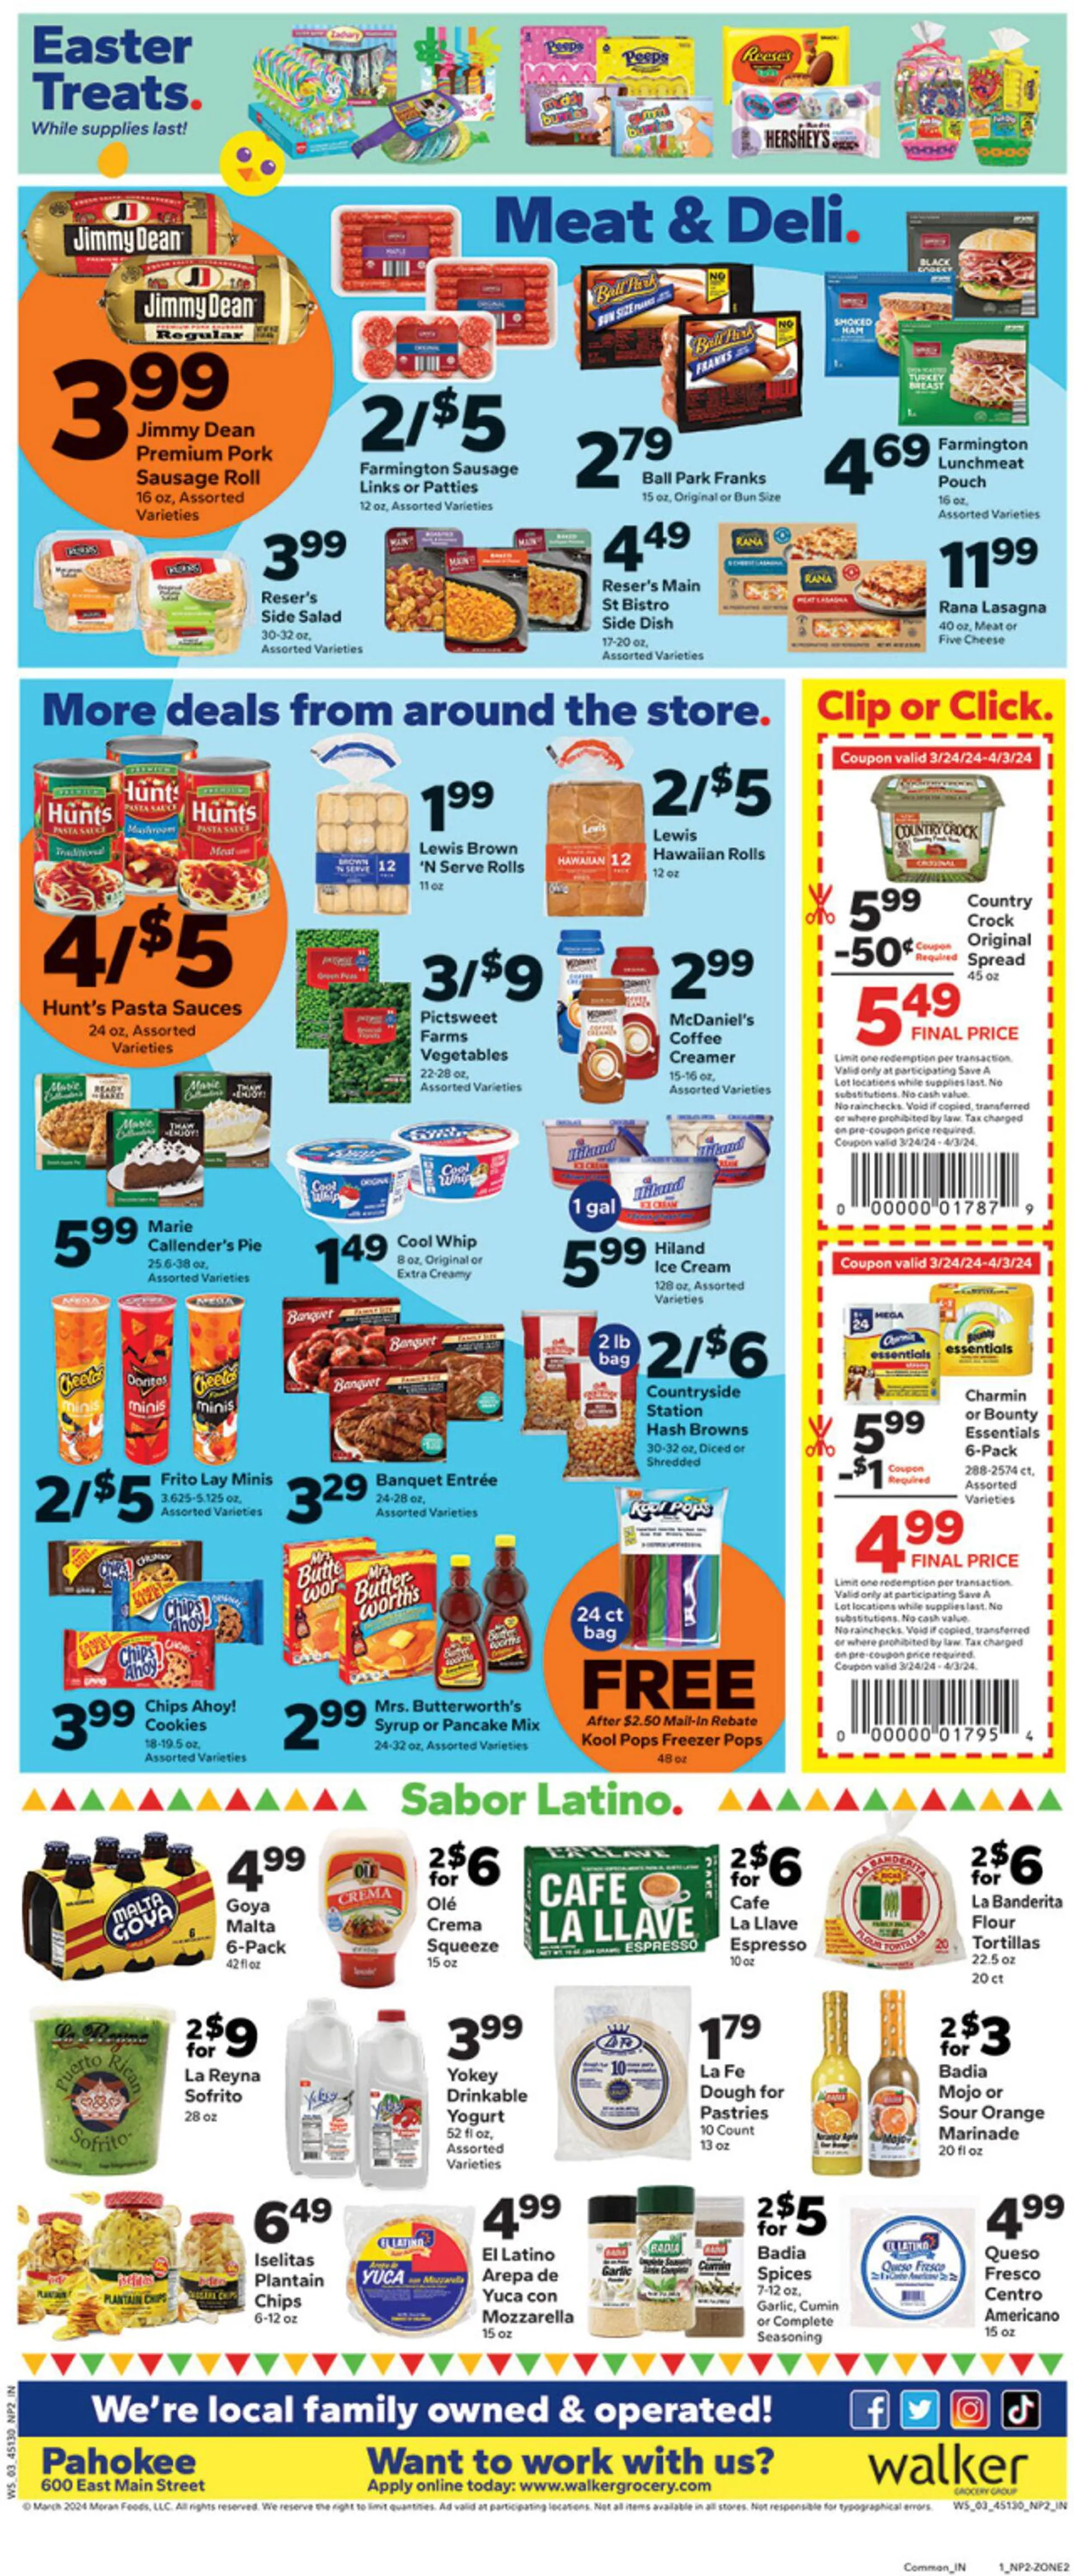 Weekly ad Save a Lot - Pahokee Current weekly ad from March 27 to April 3 2024 - Page 2